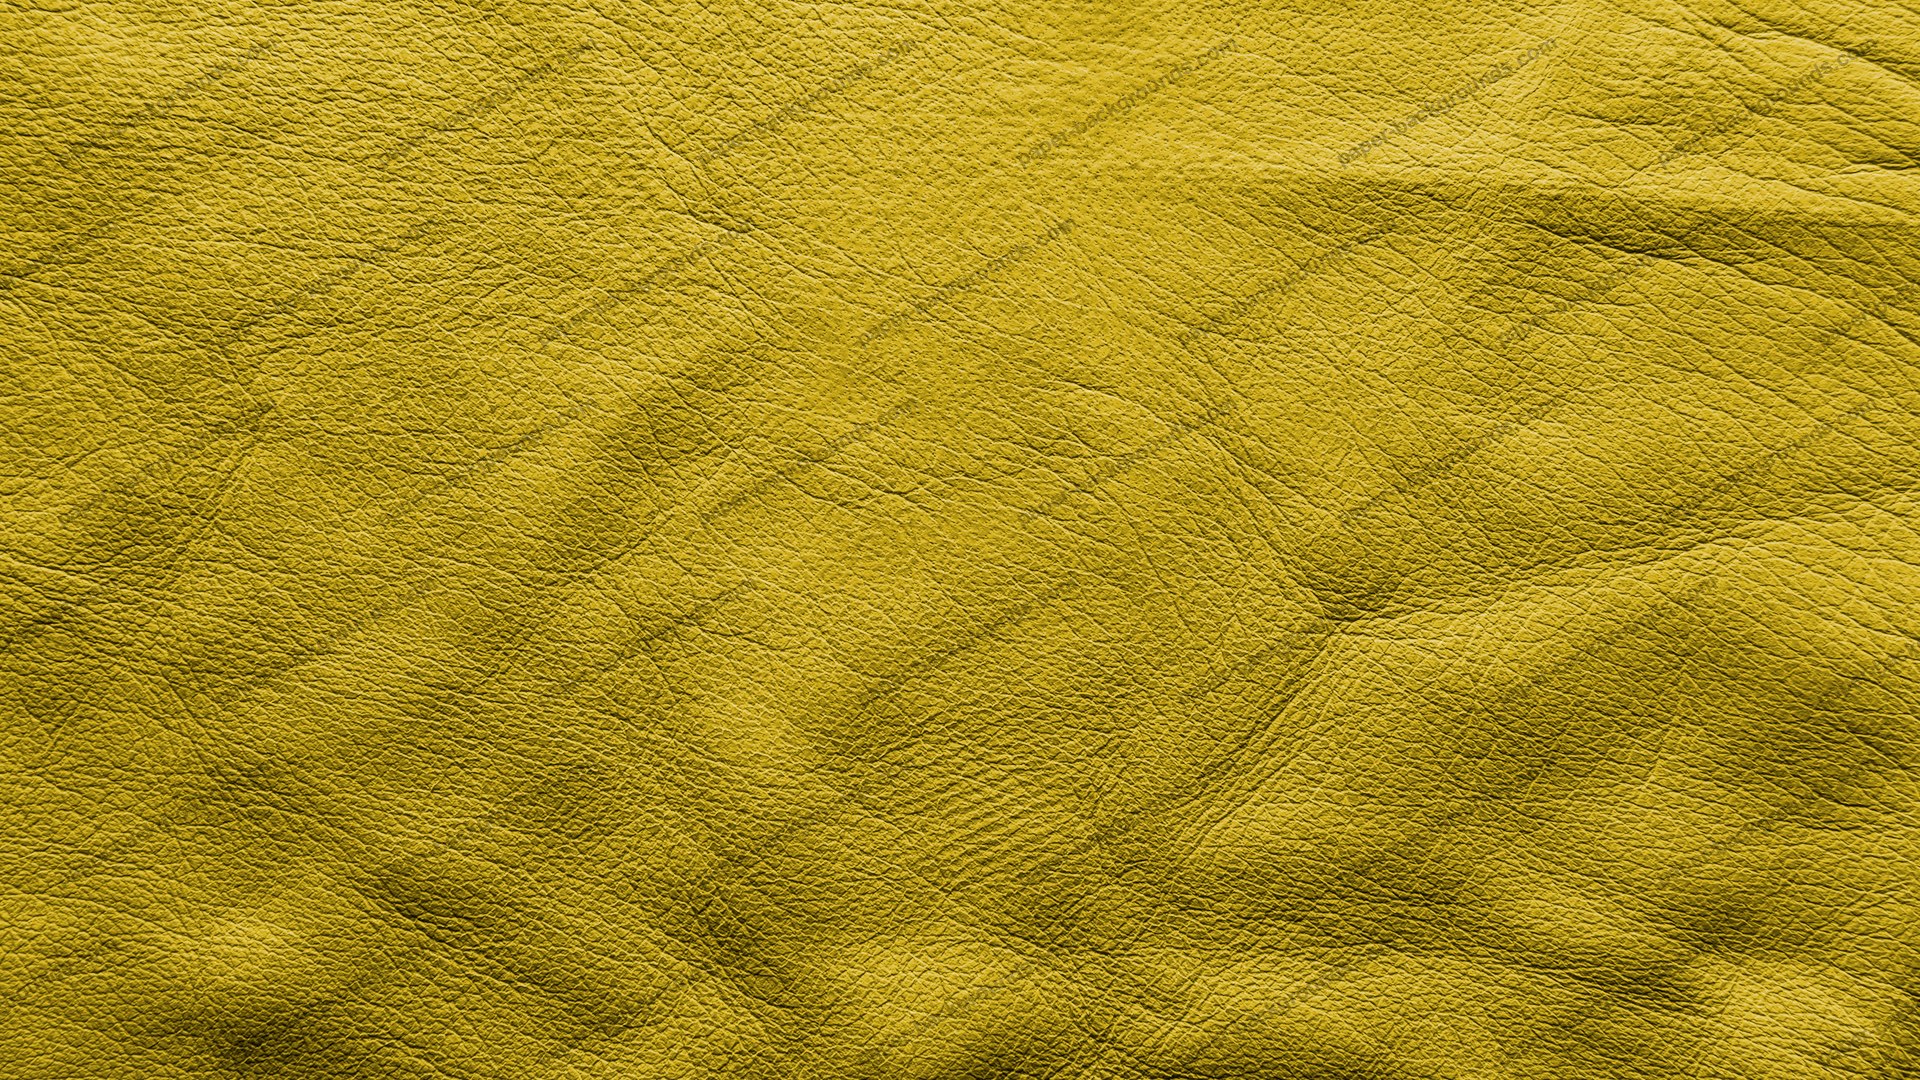 Yellow Soft Leather Background HD X 1080p Amber